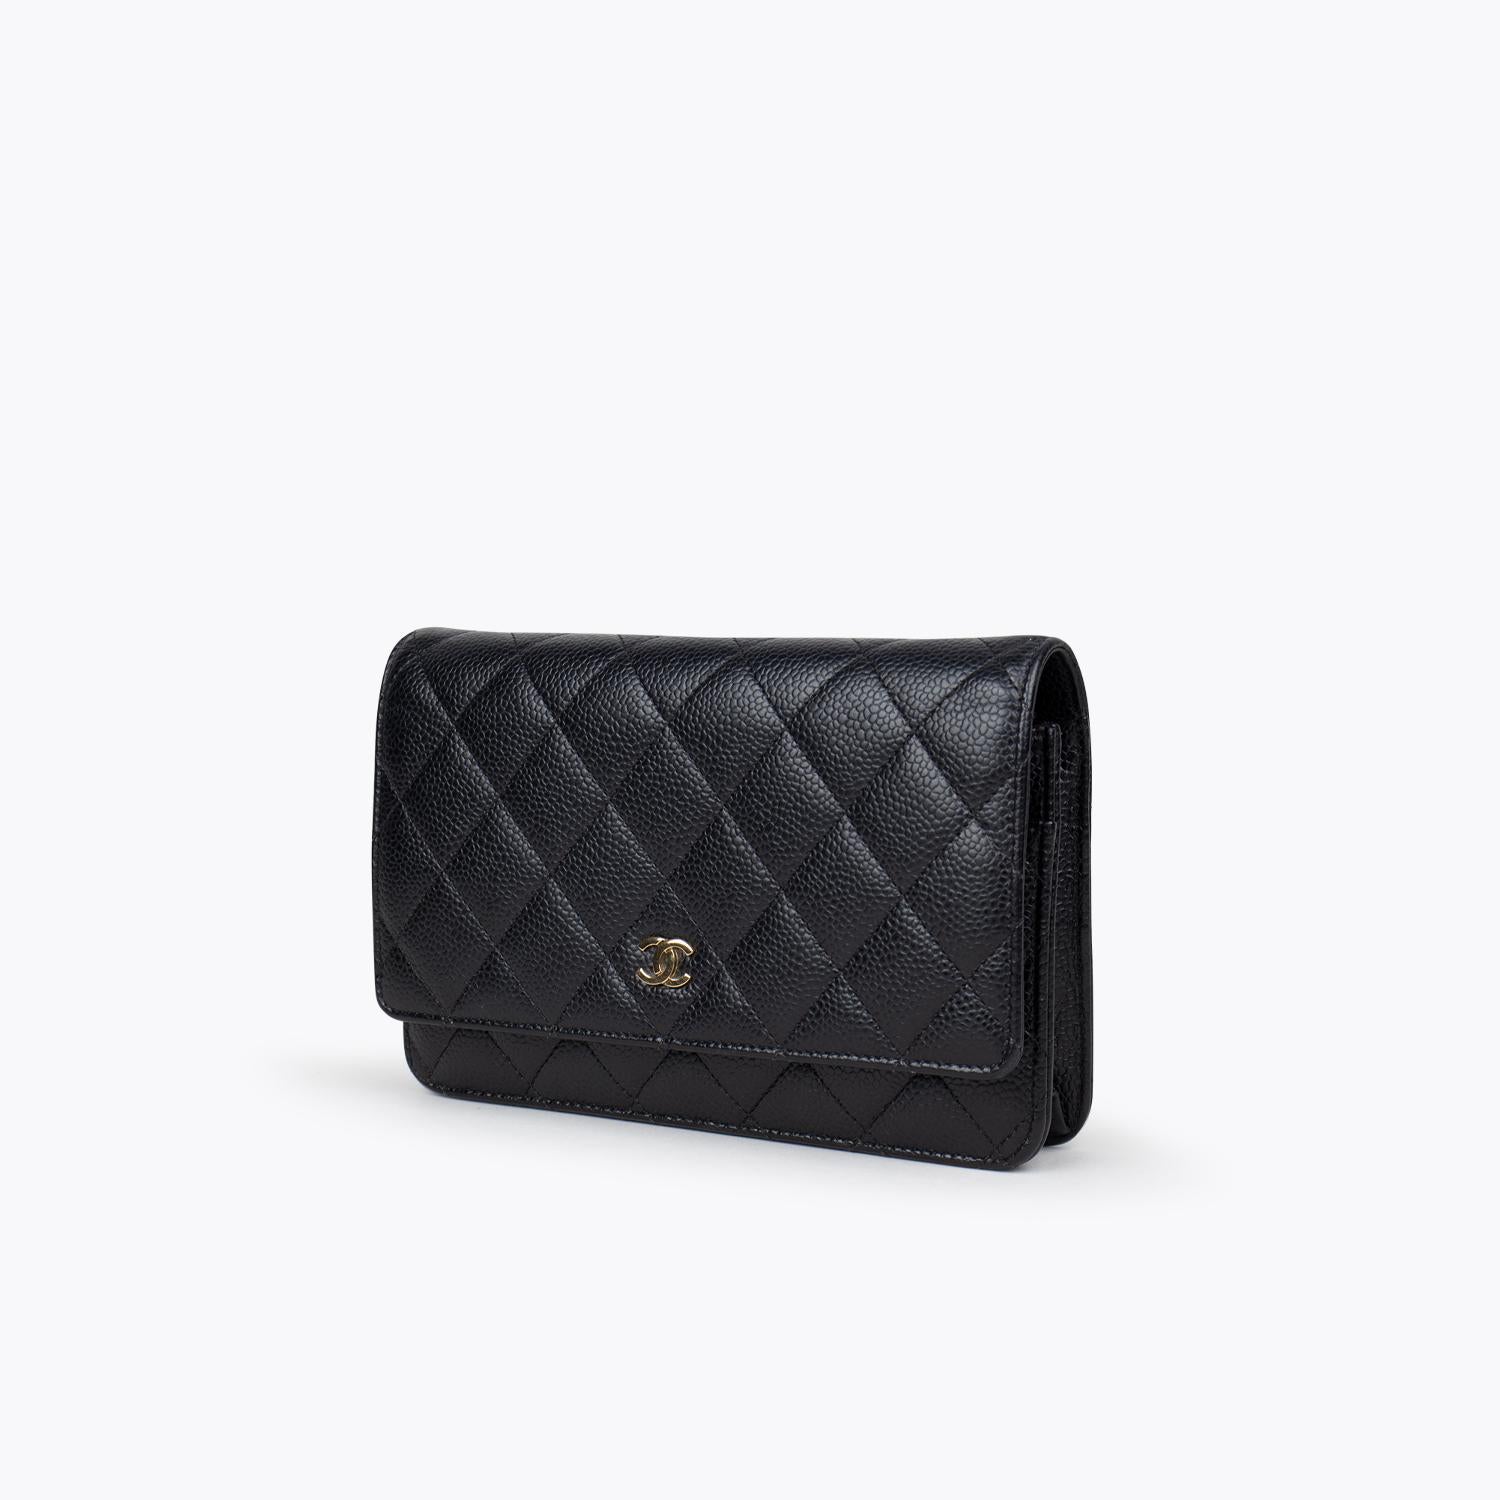 Black caviar leather Chanel Wallet on Chain with

– Gold-tone hardware
– Single chain-link and leather shoulder strap
– CC logo hardware embellishment at front
– Single patch pocket at back
– Single zip compartment at front flap underside, dual